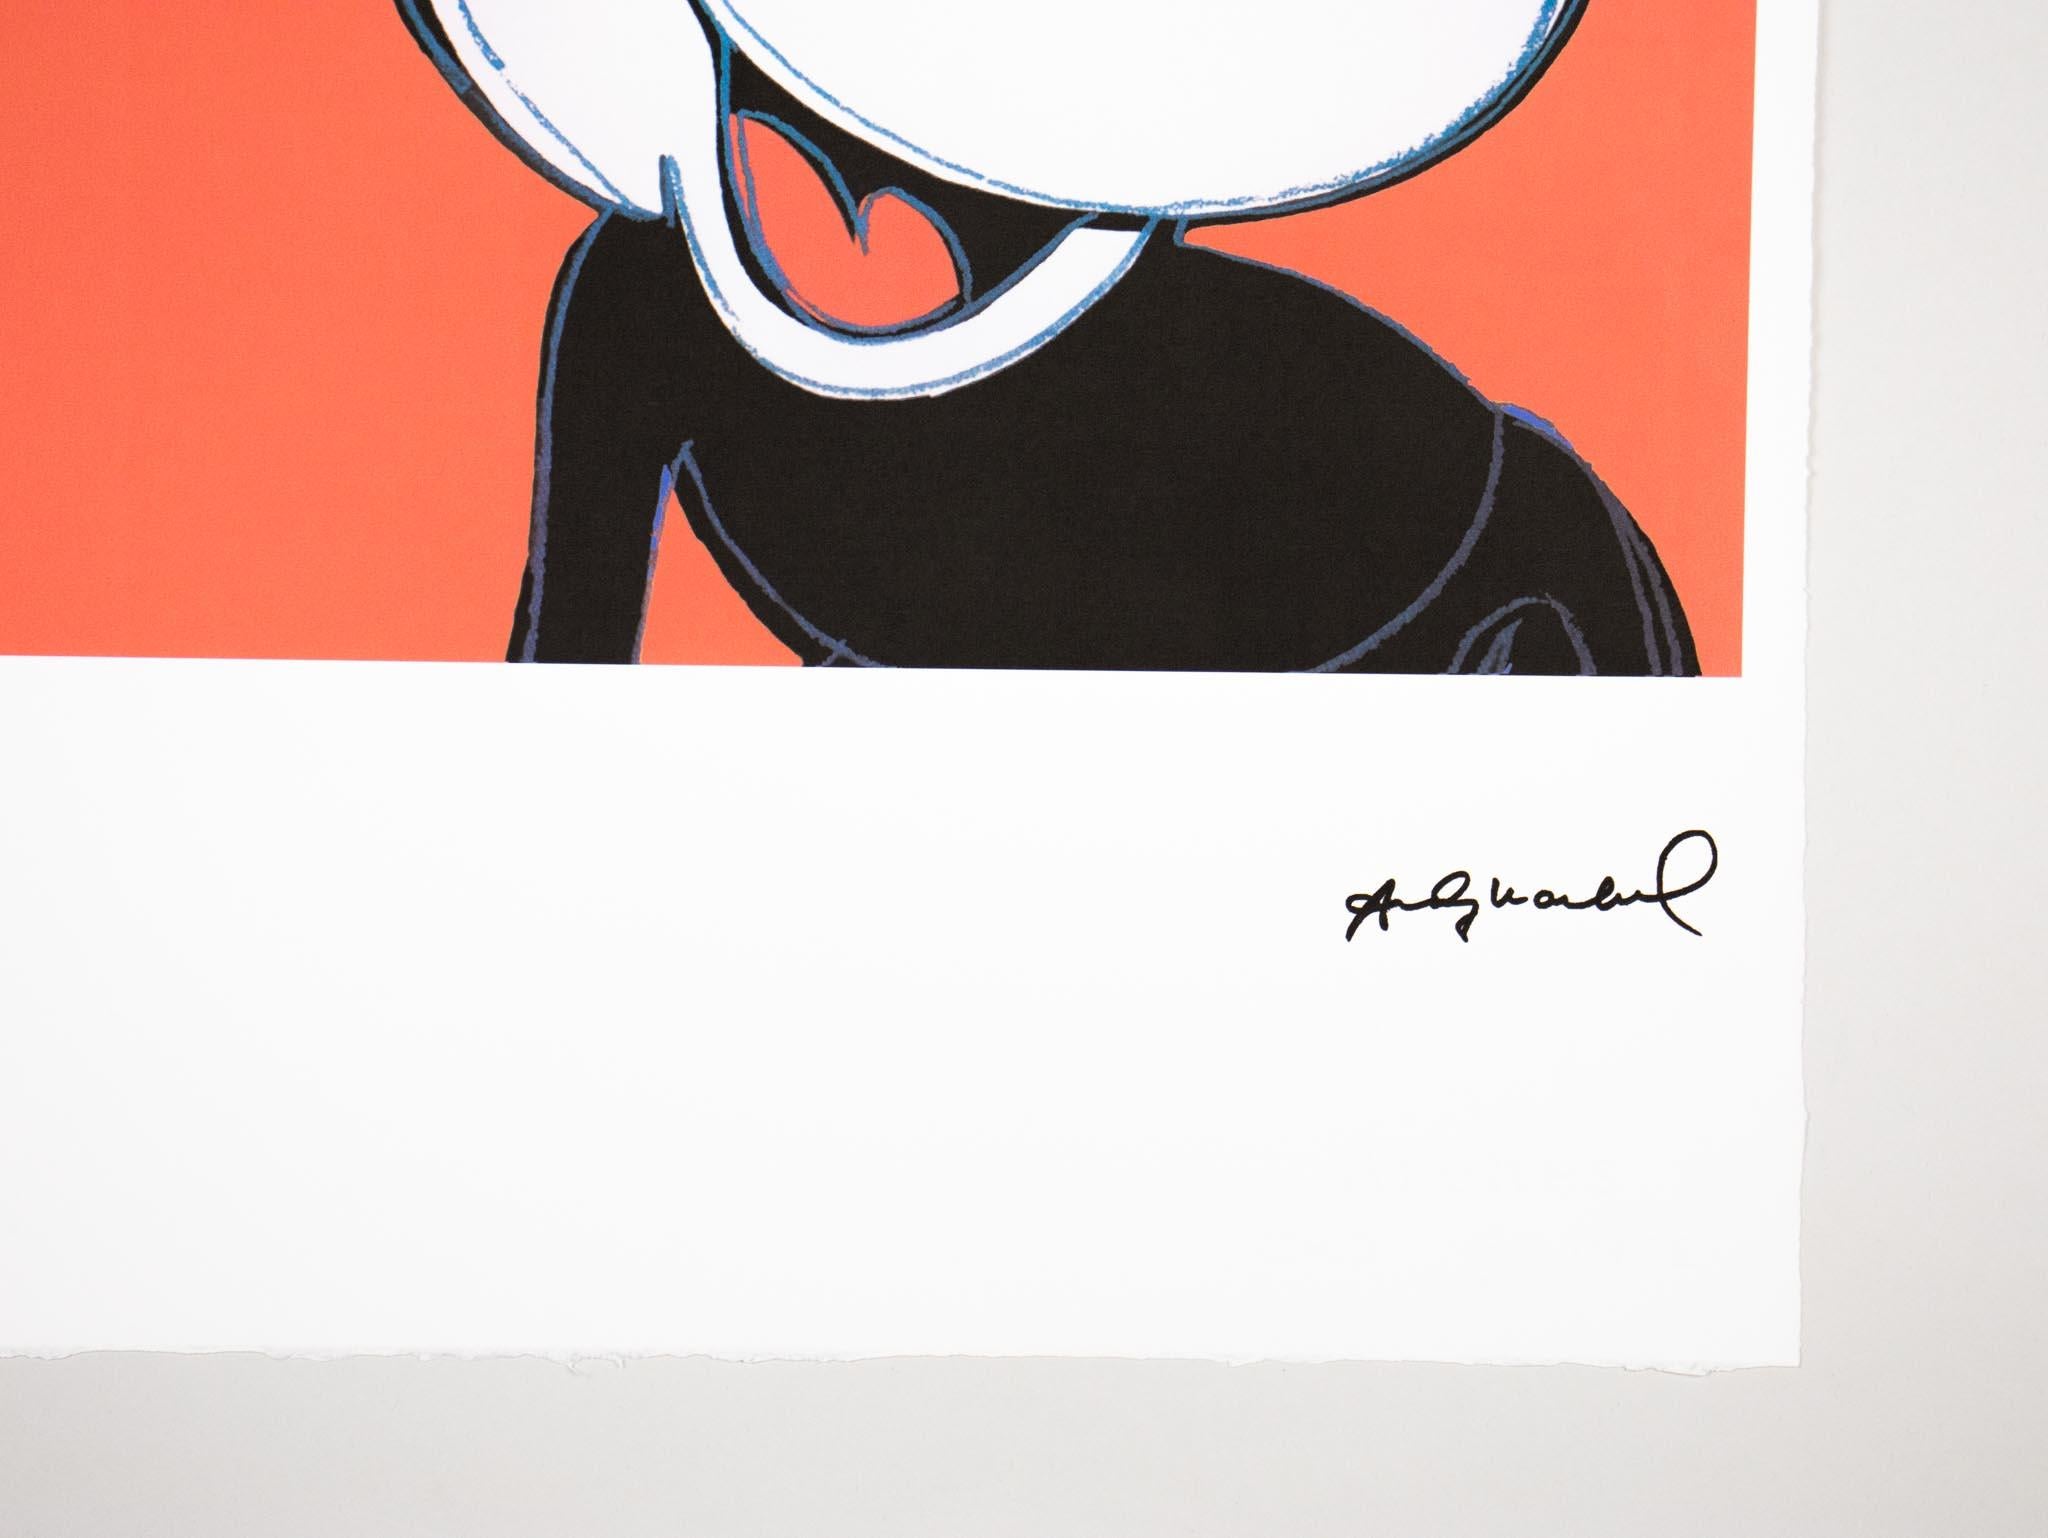 Mickey Mouse - 1983 - Original Lithograph - Limited Edition Print - 4/100 pcs. - Beige Portrait Print by Andy Warhol